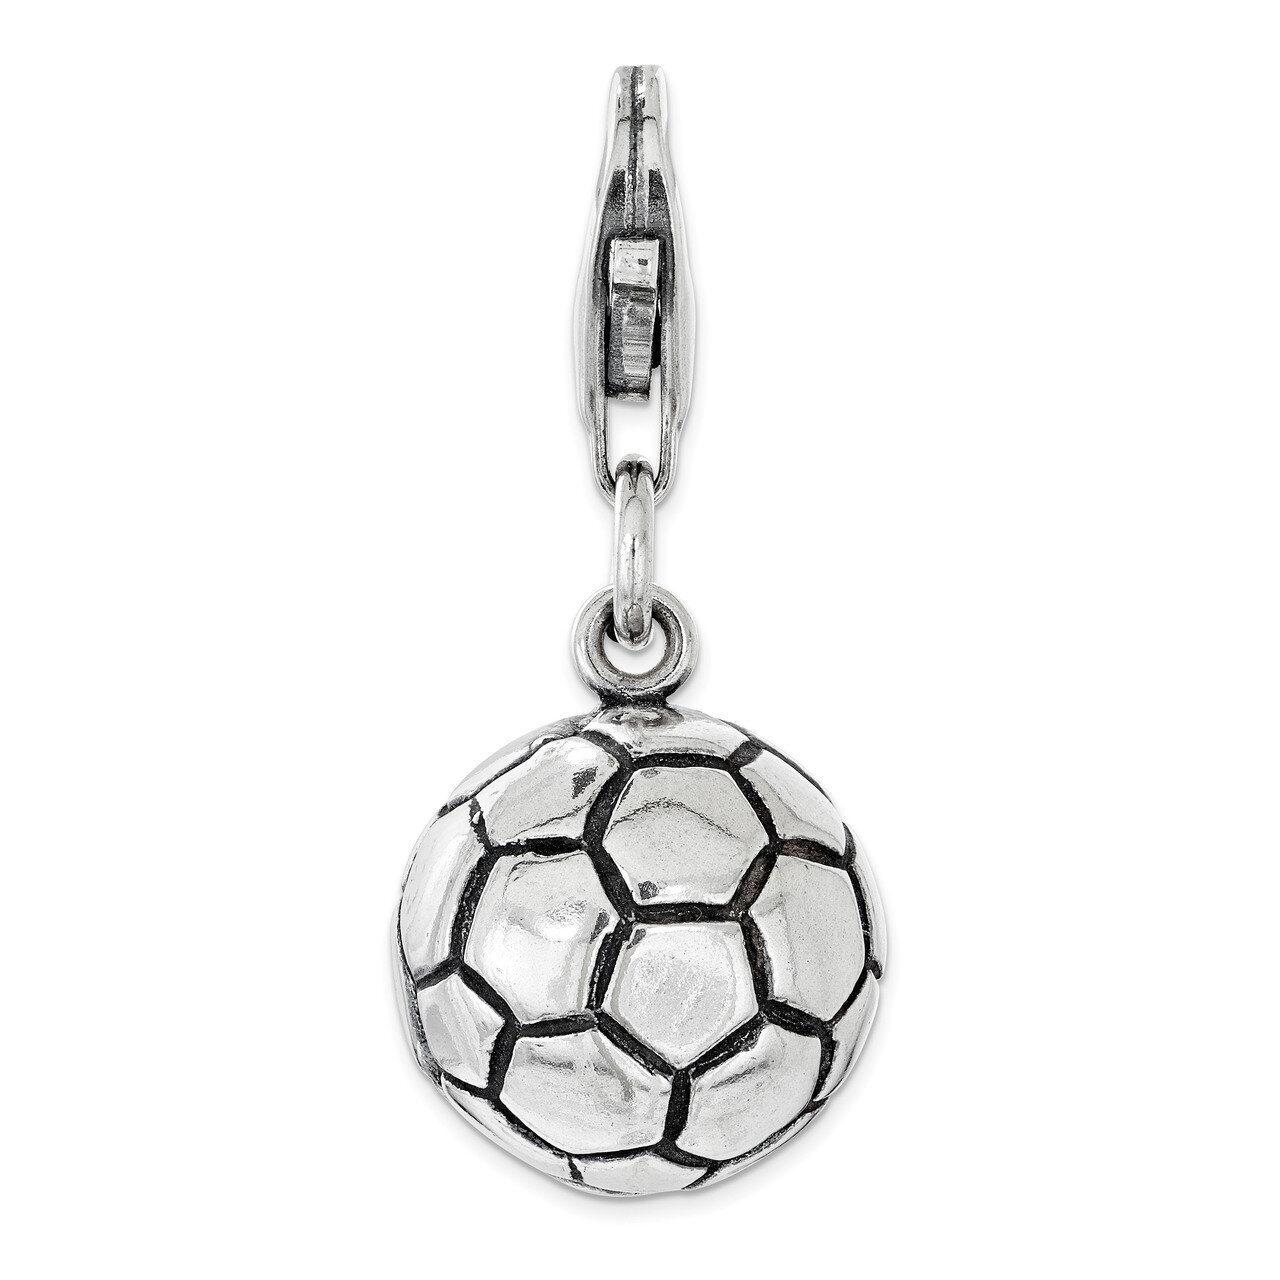 Antiqued Soccer Ball Charm - Sterling Silver Polished QCC1231